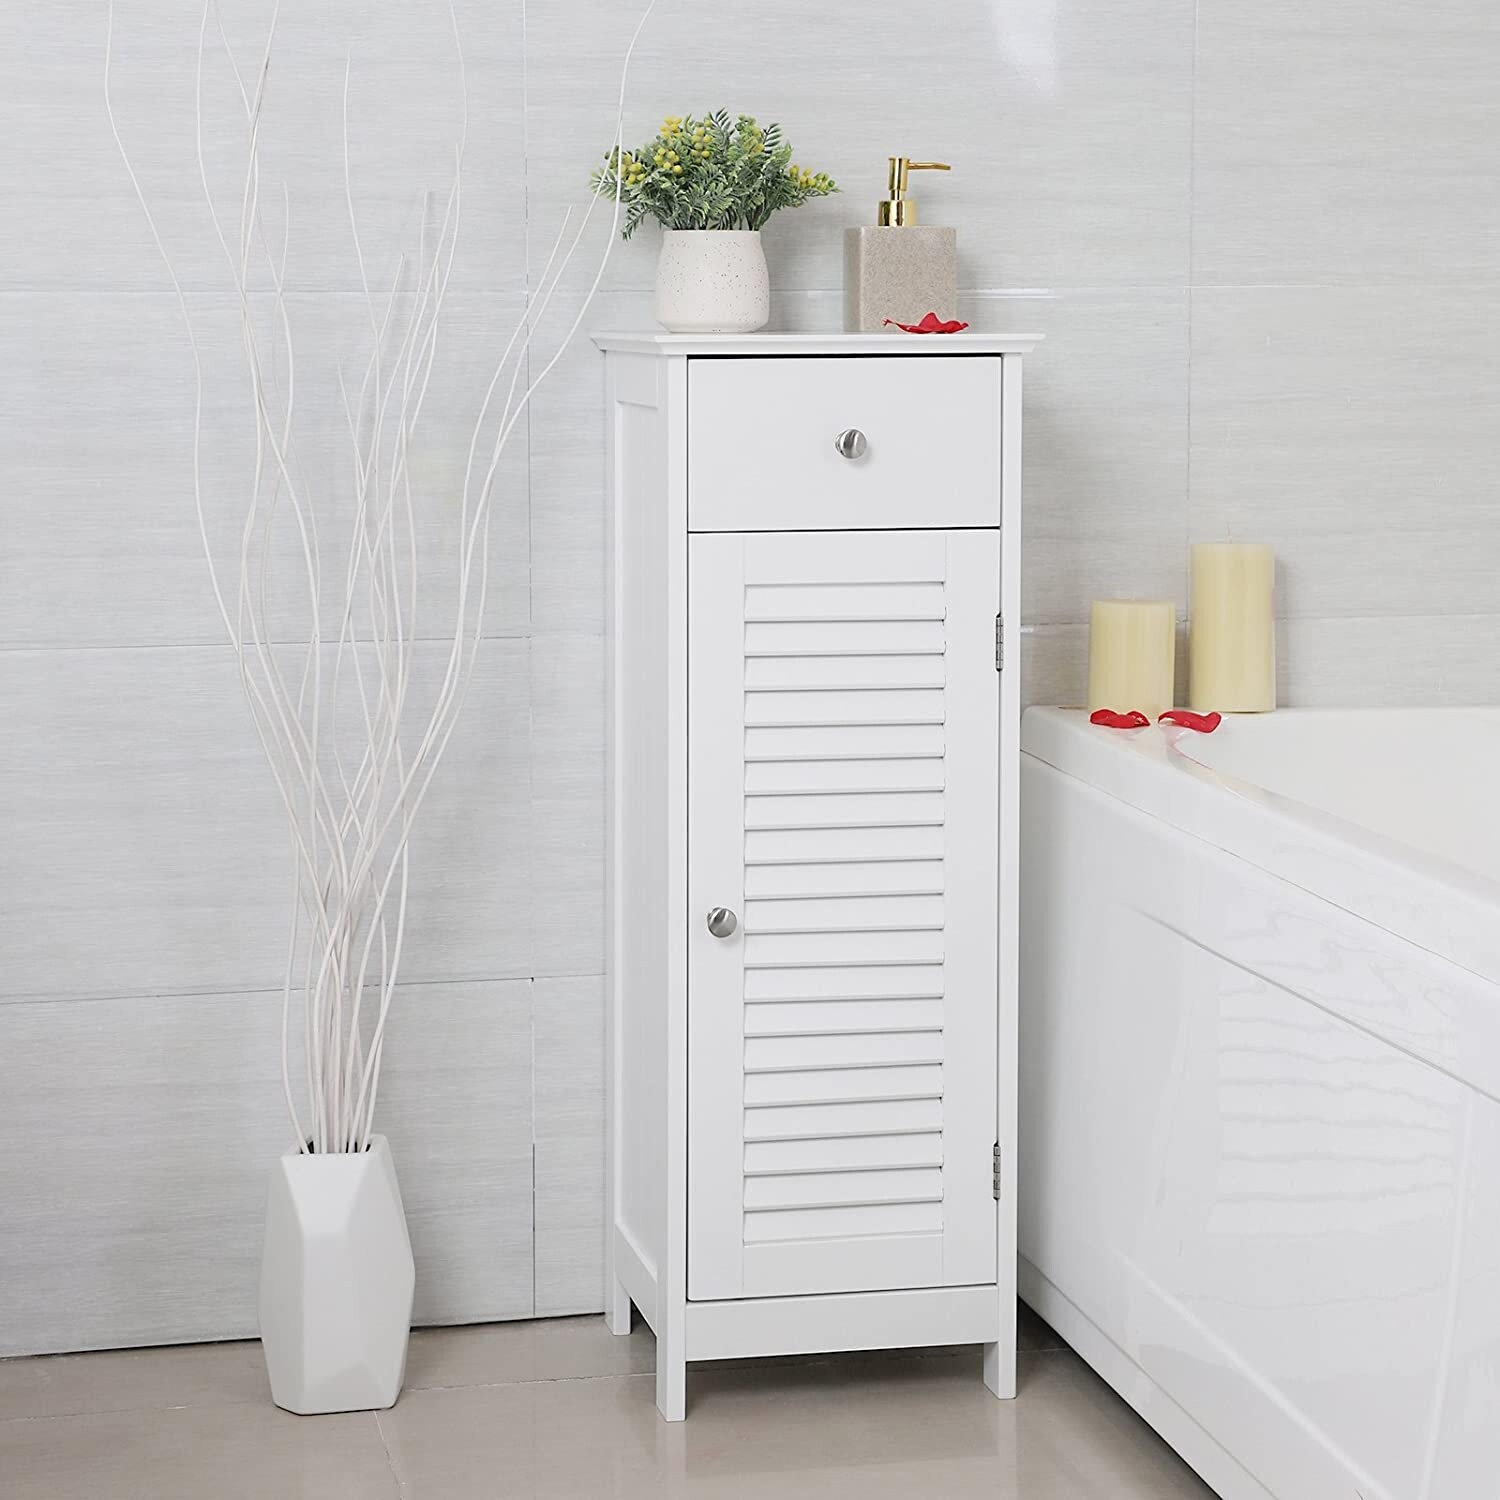 https://ak1.ostkcdn.com/images/products/is/images/direct/8c728439e30d261973306517db596e99559c61bf/White-Wood-Bathroom-Floor-Storage-Cabinet.jpg